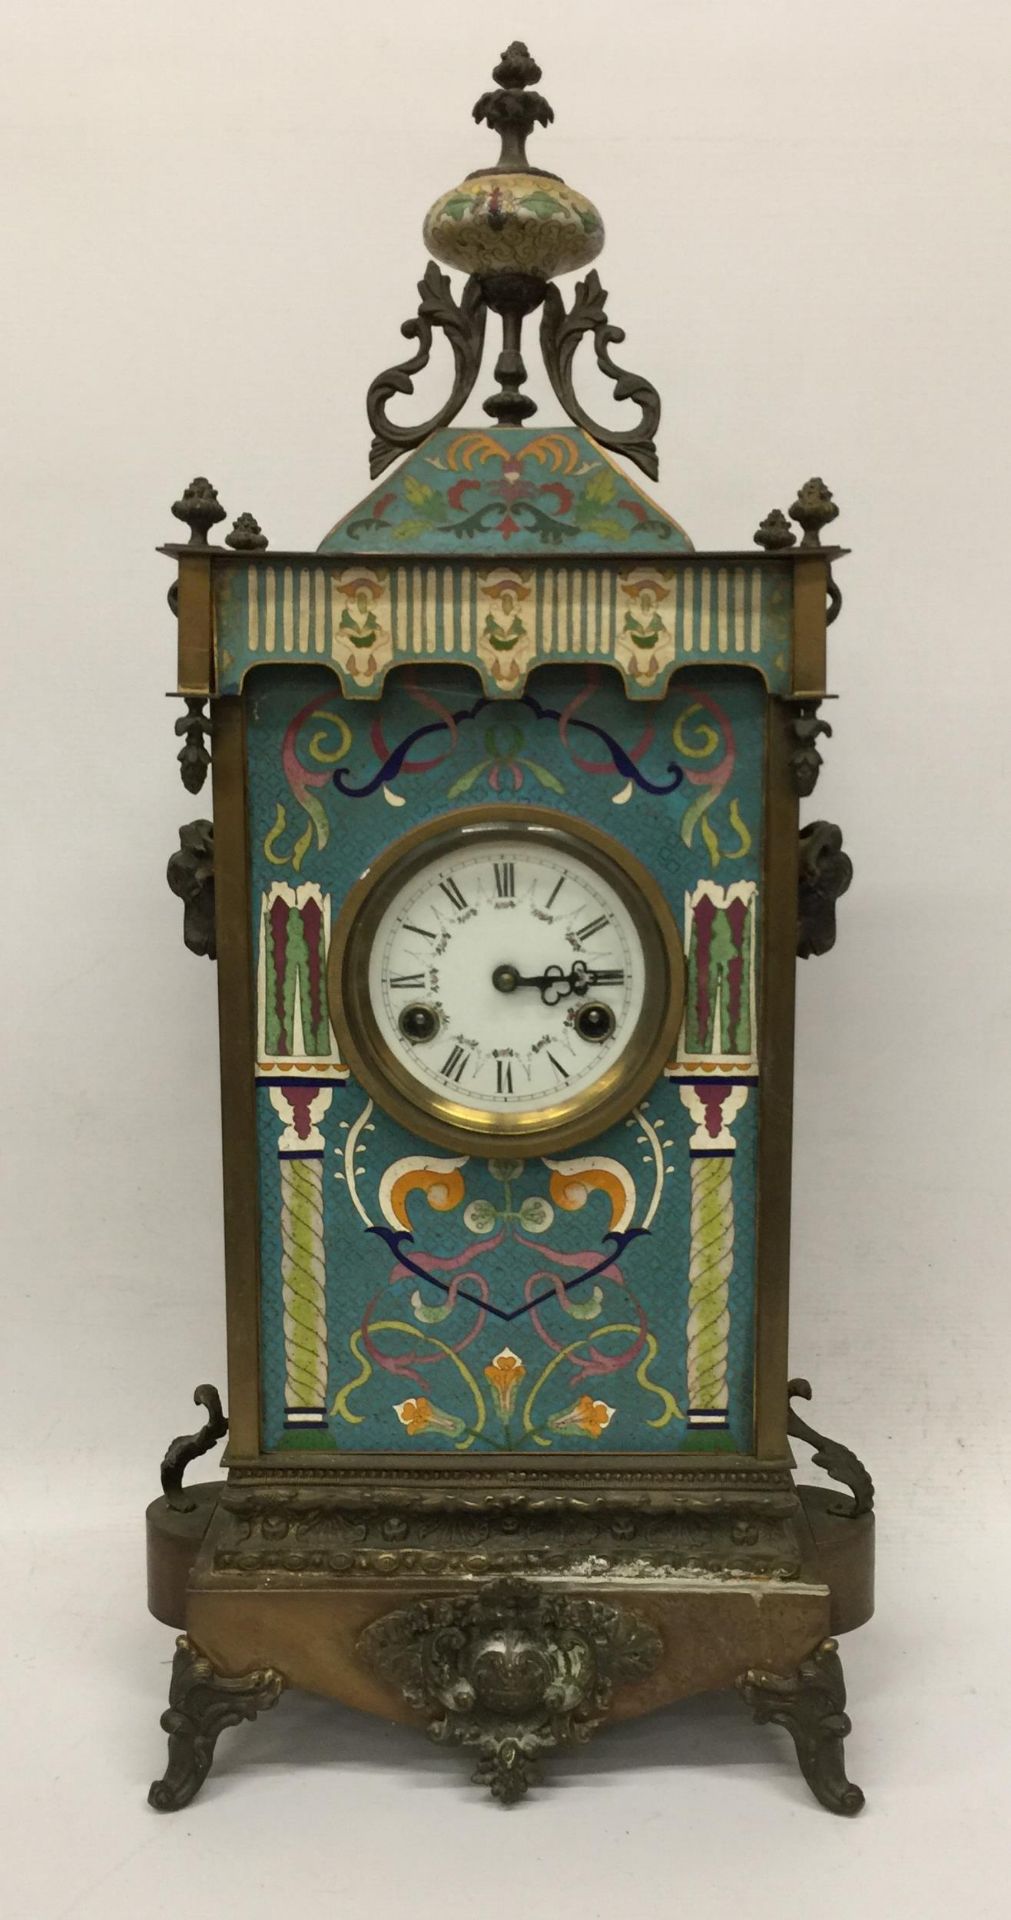 AN ART NOUVEAU CLOISONNE AND BRASS CHIMING MANTLE CLOCK WITH RAM HEAD SIDE DESIGN